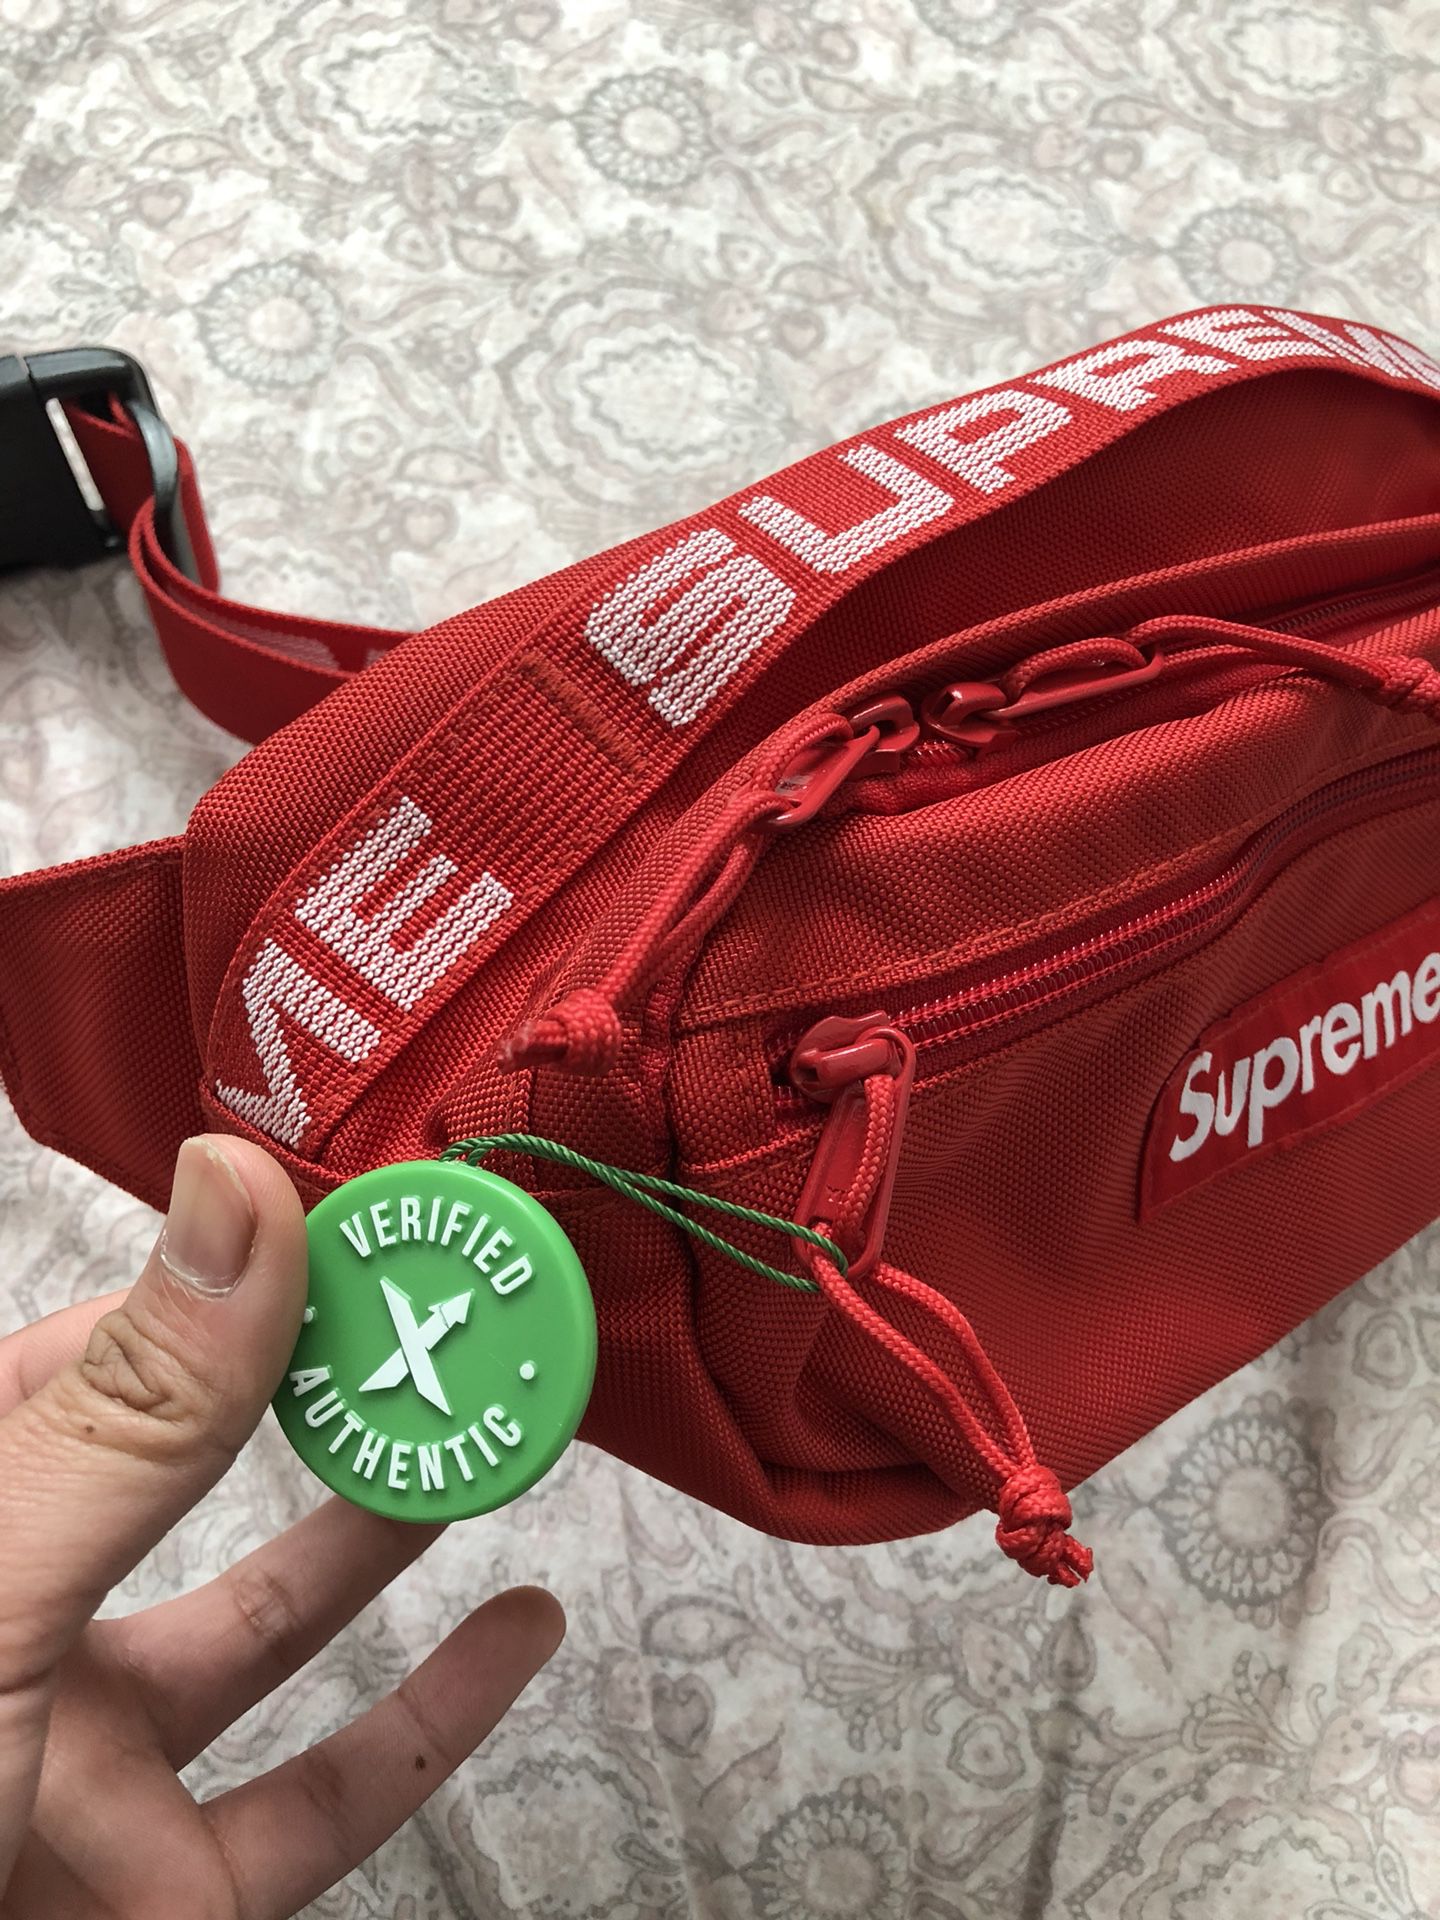 Supreme SS17 Backpack With SS18 Waist Bag Bundle for Sale in Albany, NY -  OfferUp